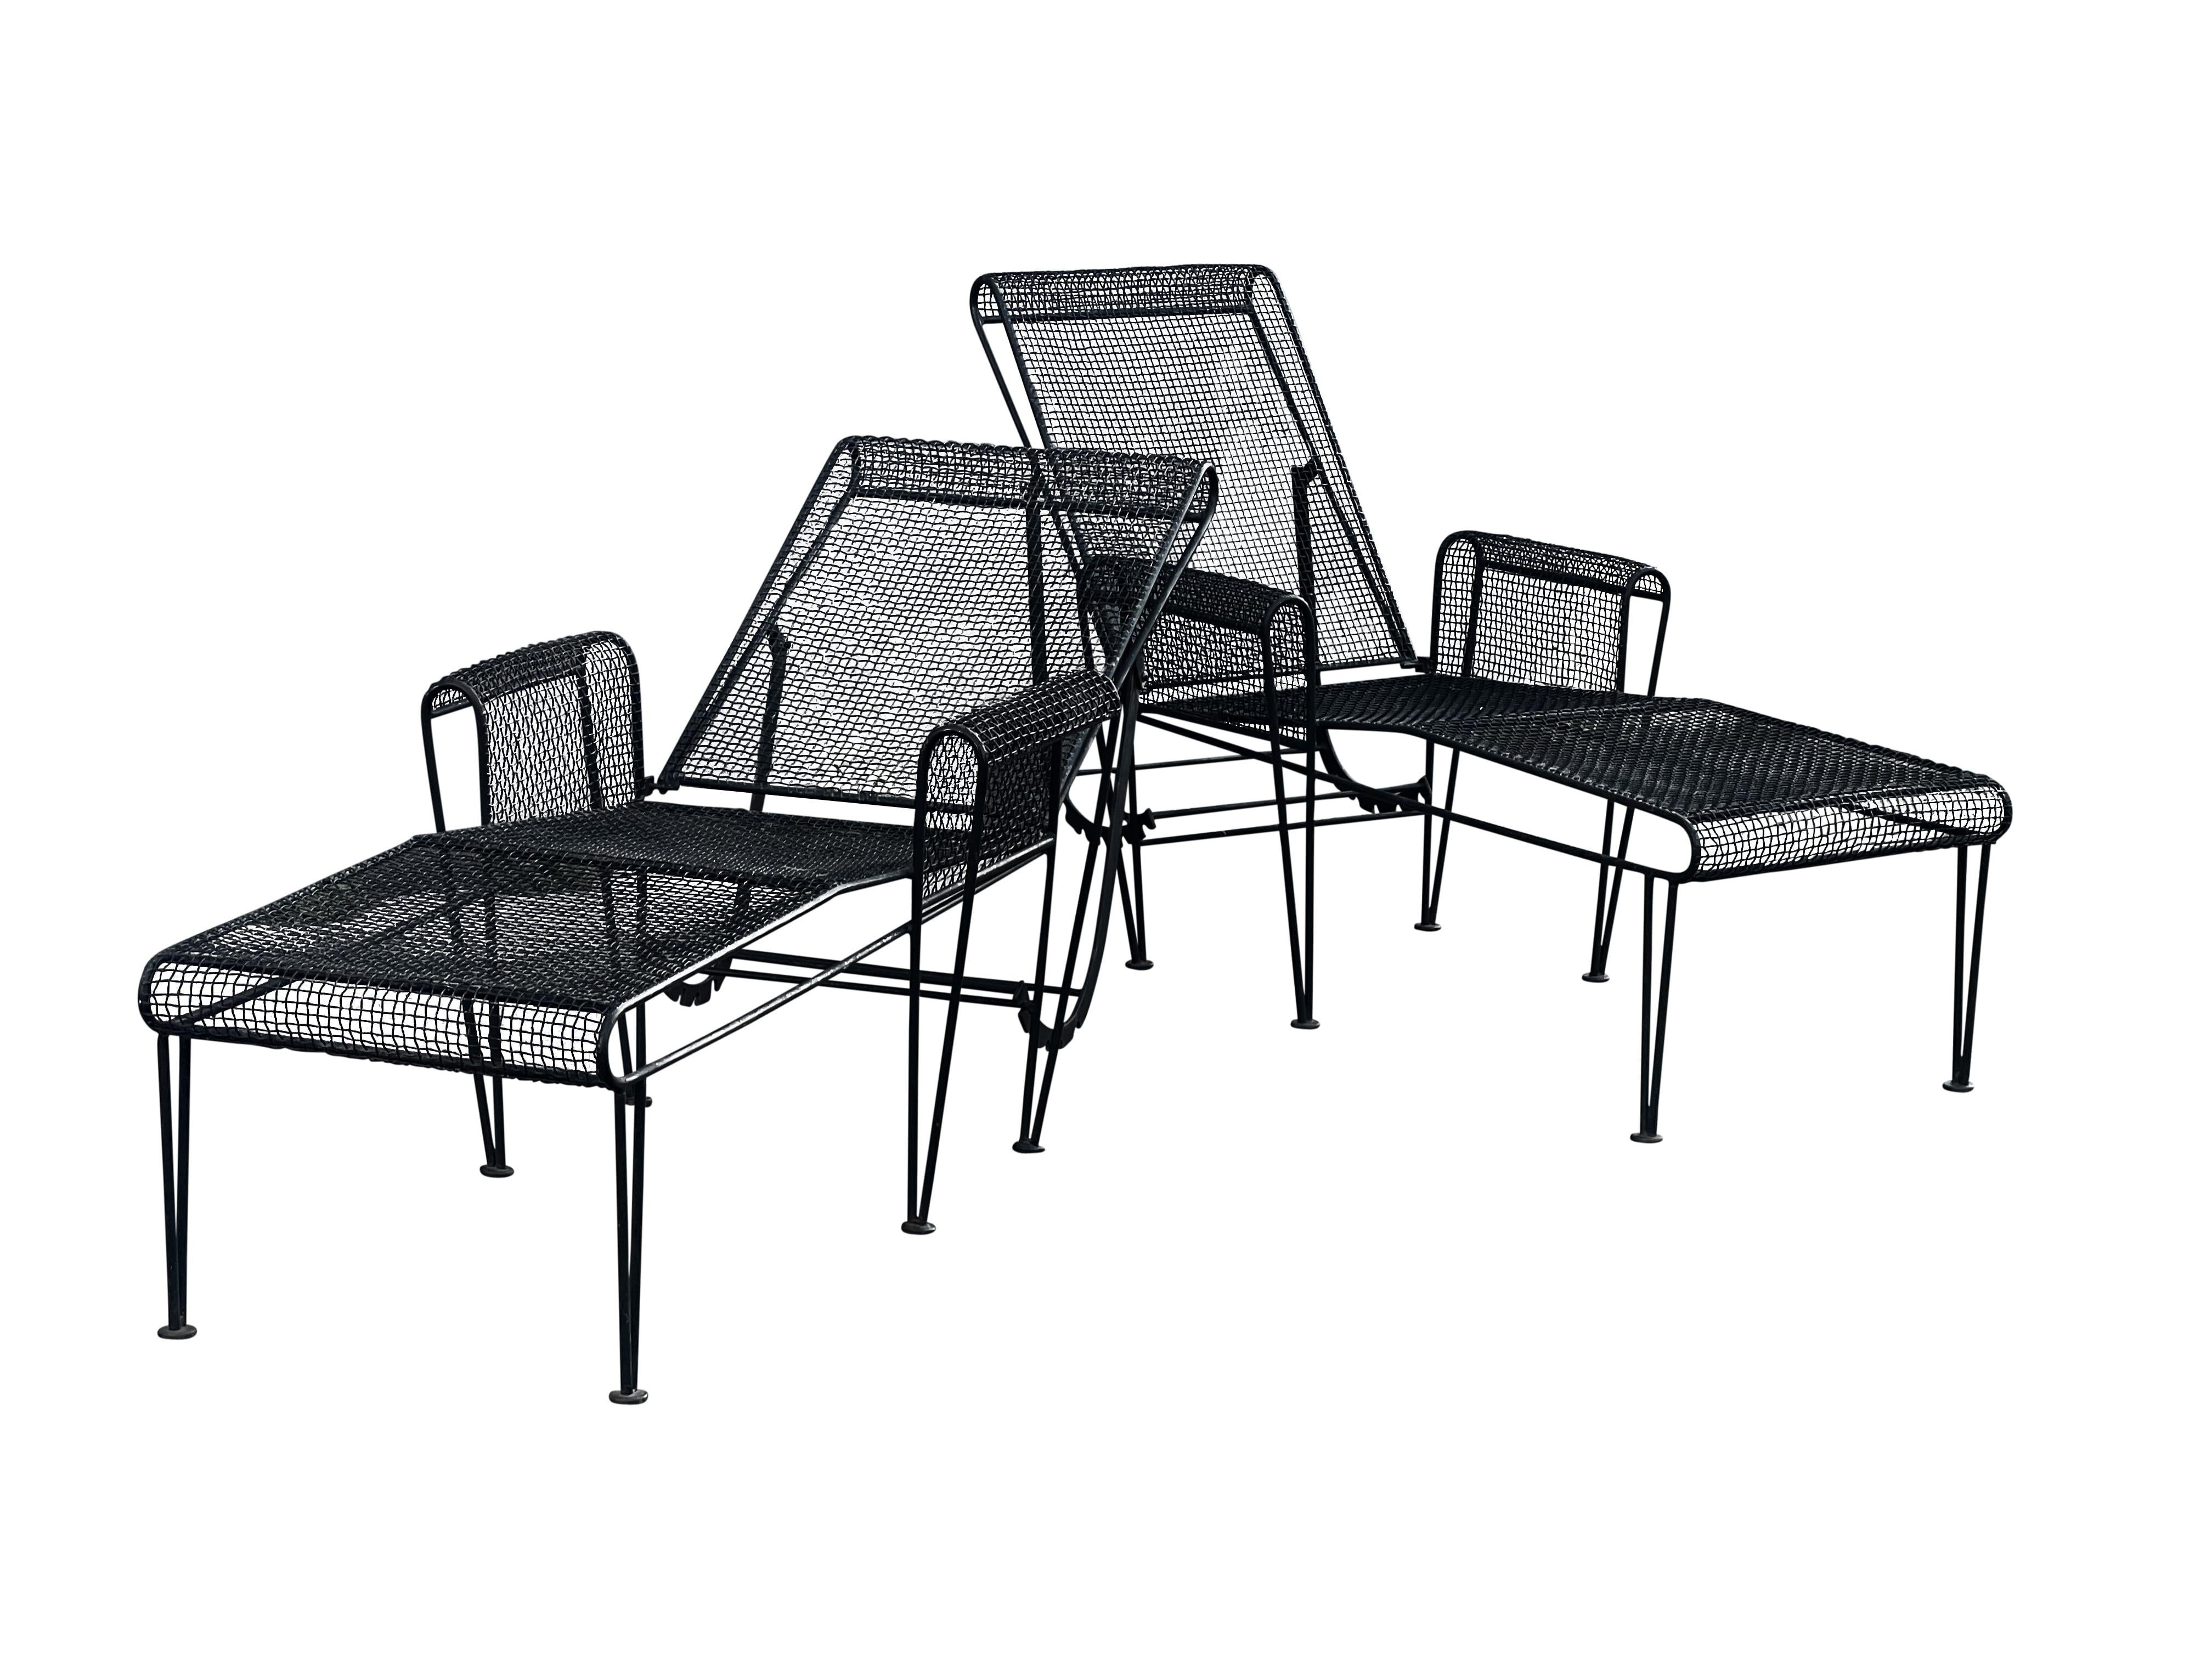 Originating in Owosso, Michigan, Woodard stands as a revered American brand, skillfully handcrafting furniture from robust iron and aluminum. This set of chaise lounges, showcasing their enduring design ethos, emerged in the mid-20th century and